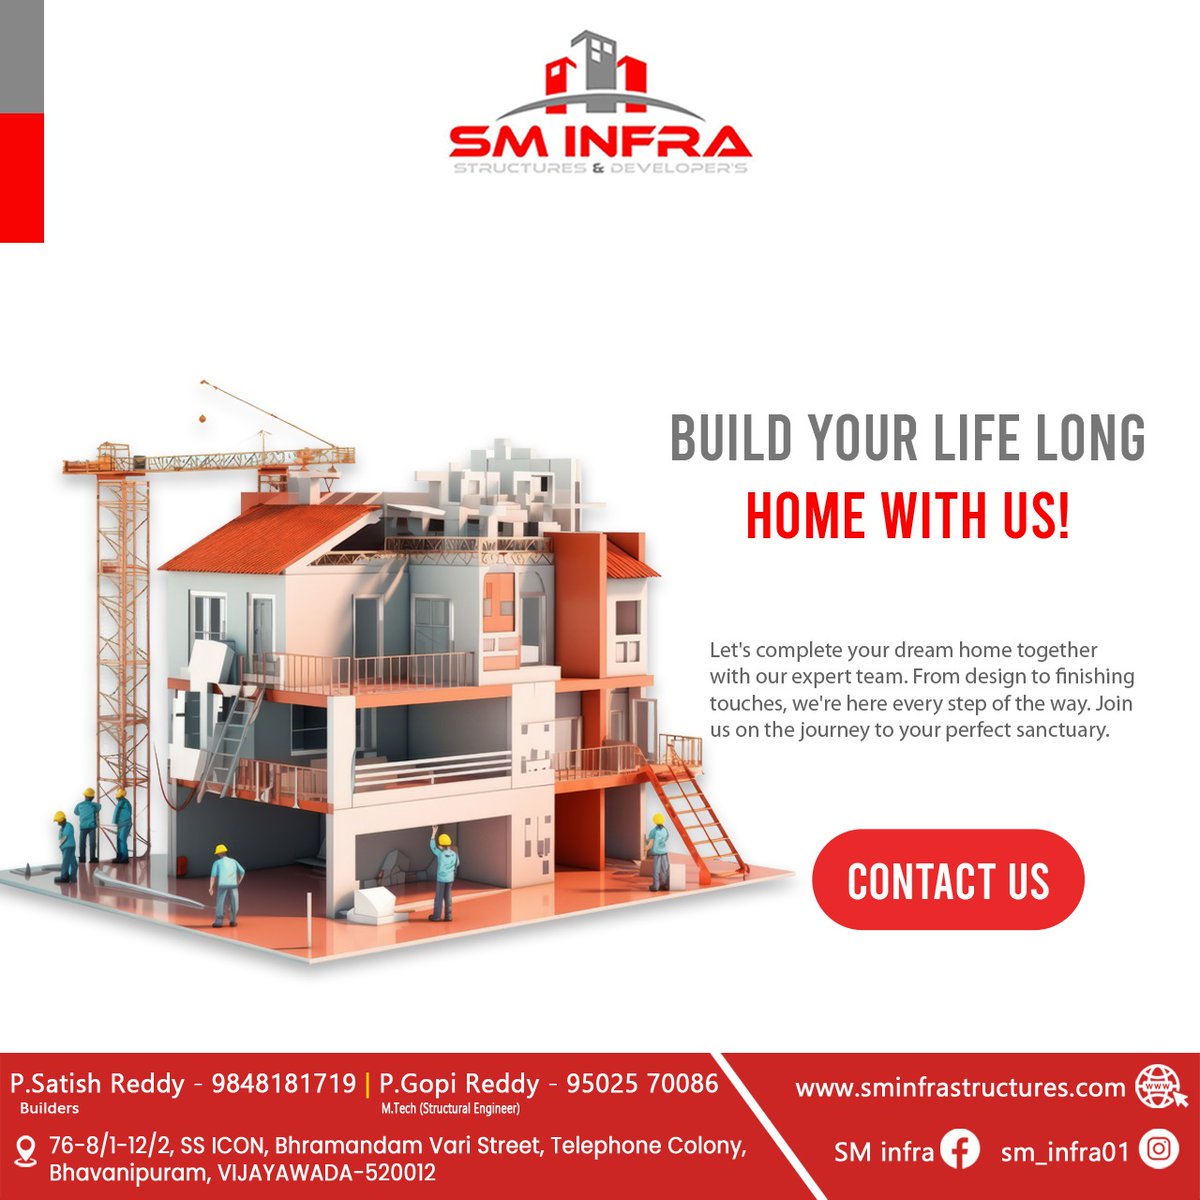 BUILD YOUR LIFE LONG HOME WITH US!

#sminfra #sminfraconst #dreamhome #homeplane #homedesigns #home #sweethome #homeconstruction #vijayawada #vijayawadaconstruction #buildtoendure #built #infrastructures #3darchitectureplans #structuraldesign #interiordesigns #perfecthome